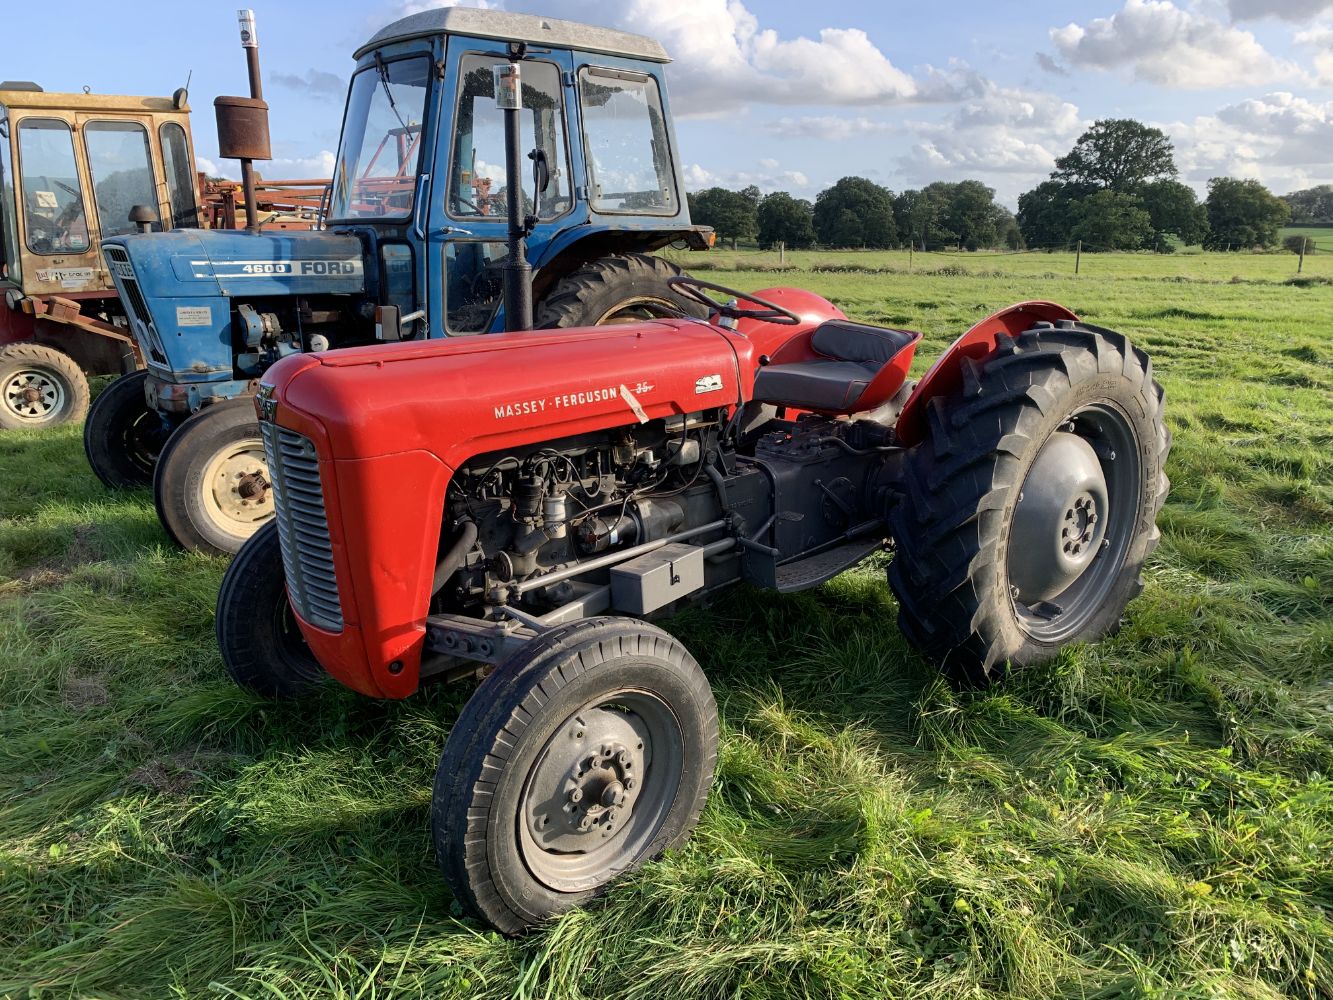 PARK FARM, ALNE, EASINGWOLD, YO61 1RN - 21st Annual Collective Sale of Farm Machinery, Equipment, Vintage Machinery & Bygones